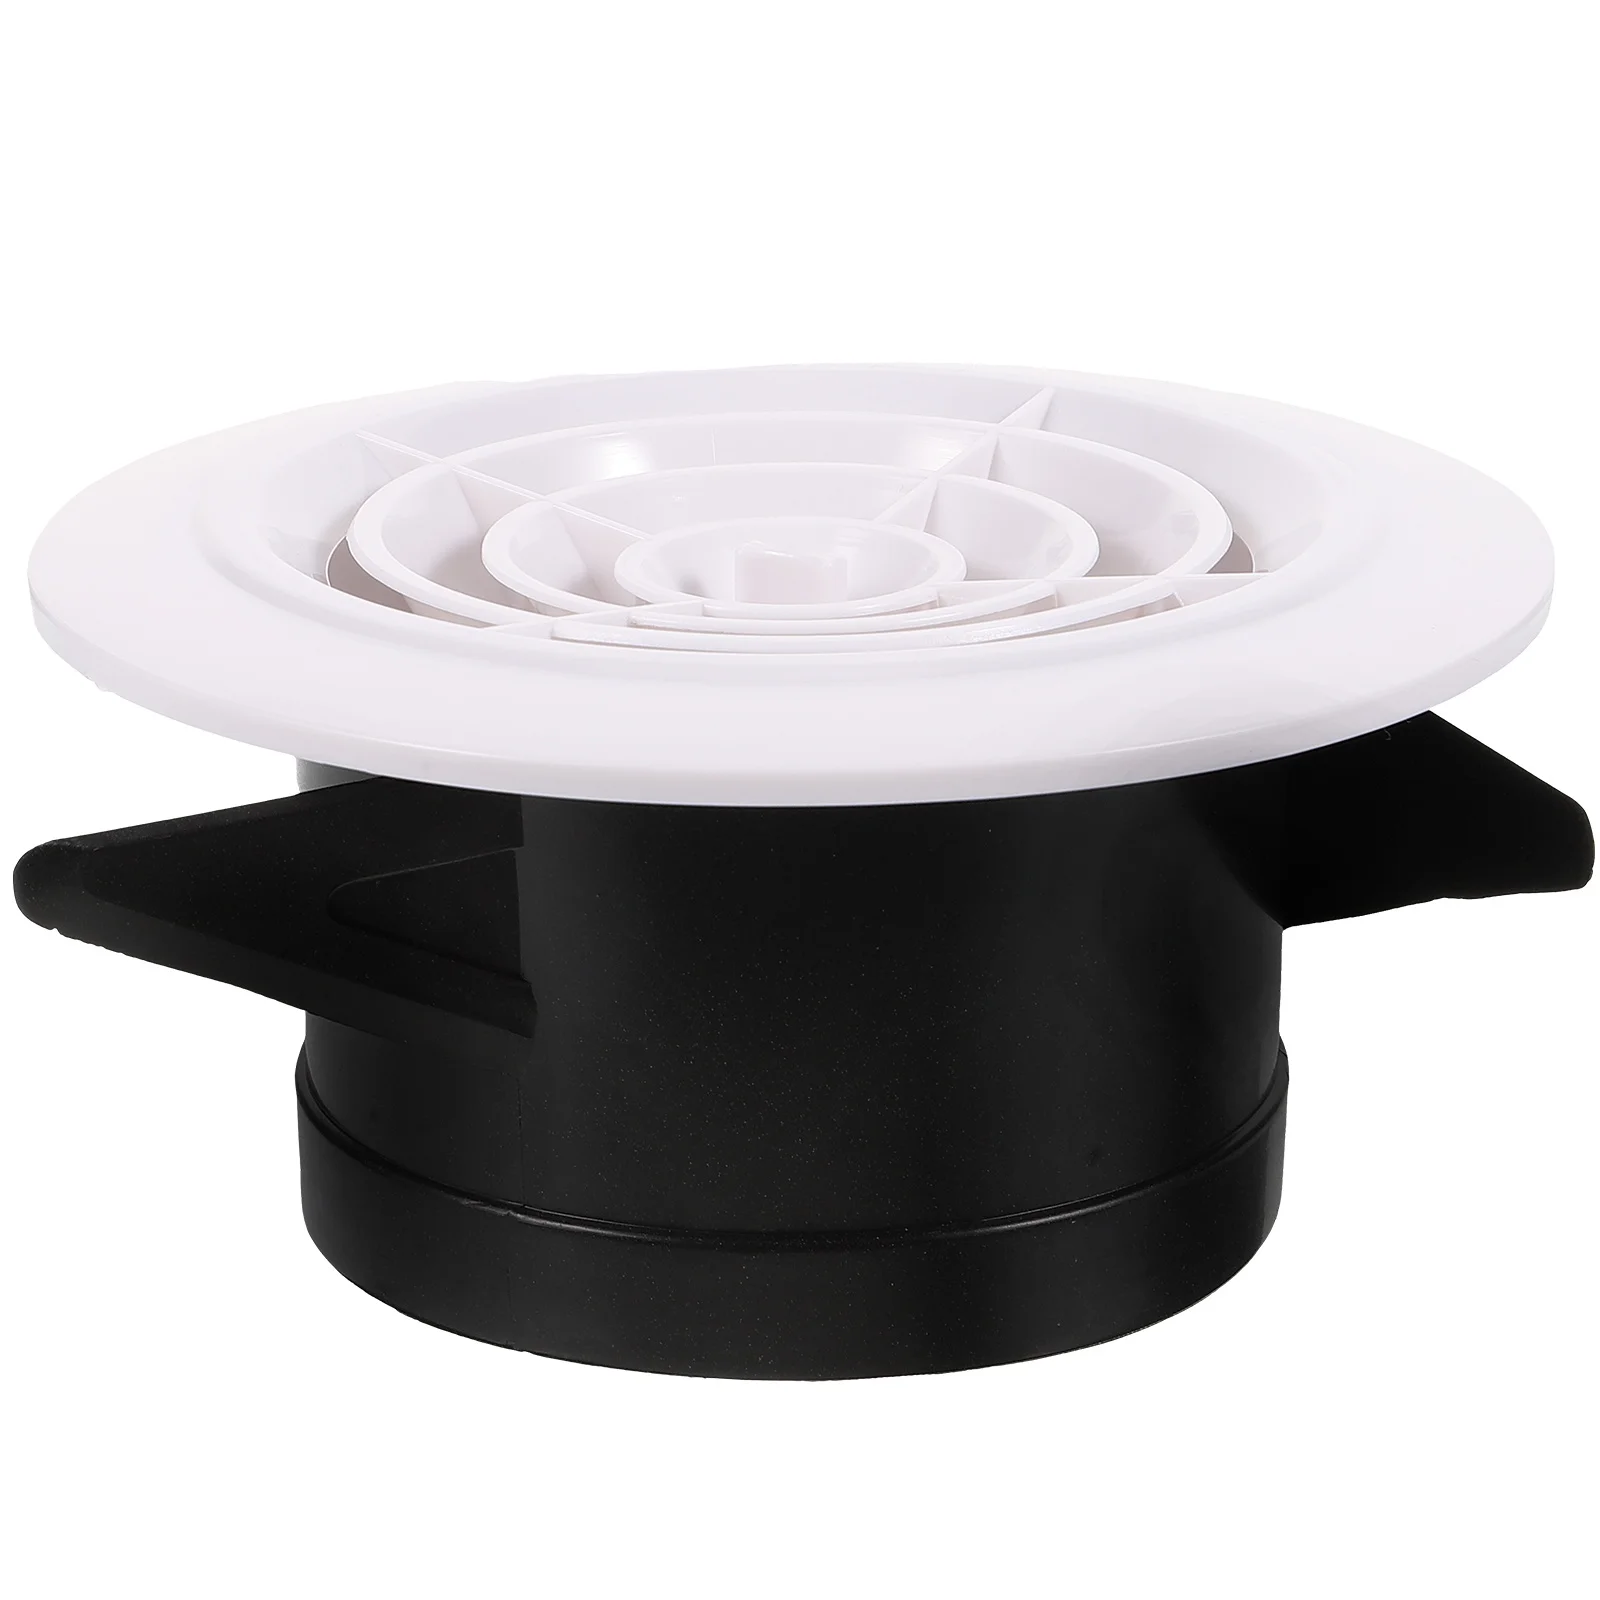 

Air Vent Cover Air Conditioner Ventilation Wall Ceiling Exhaust Vent Replacement Part Home furnishing